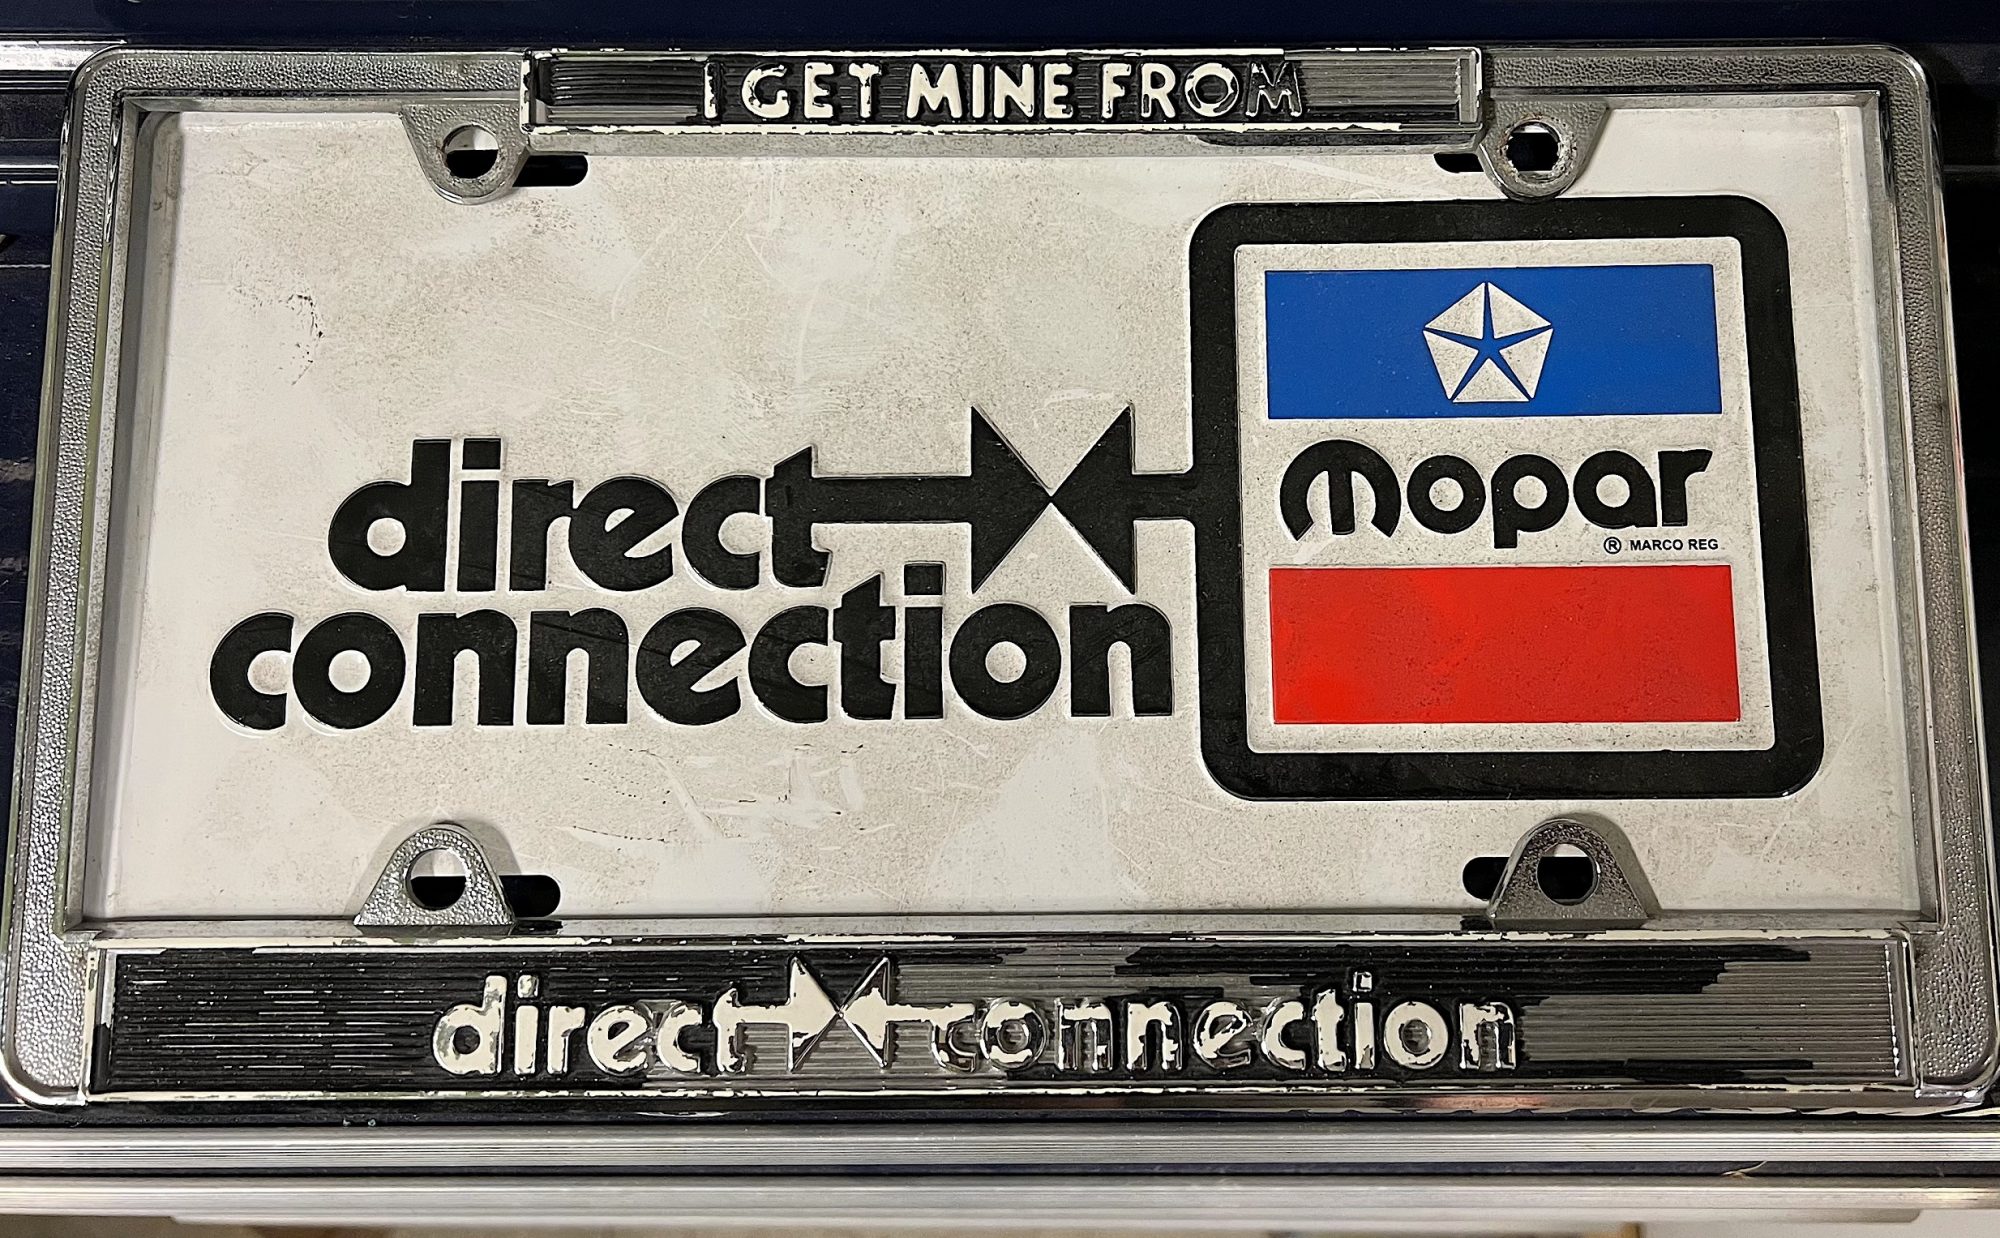 Vintage Direct Connection license plate cover